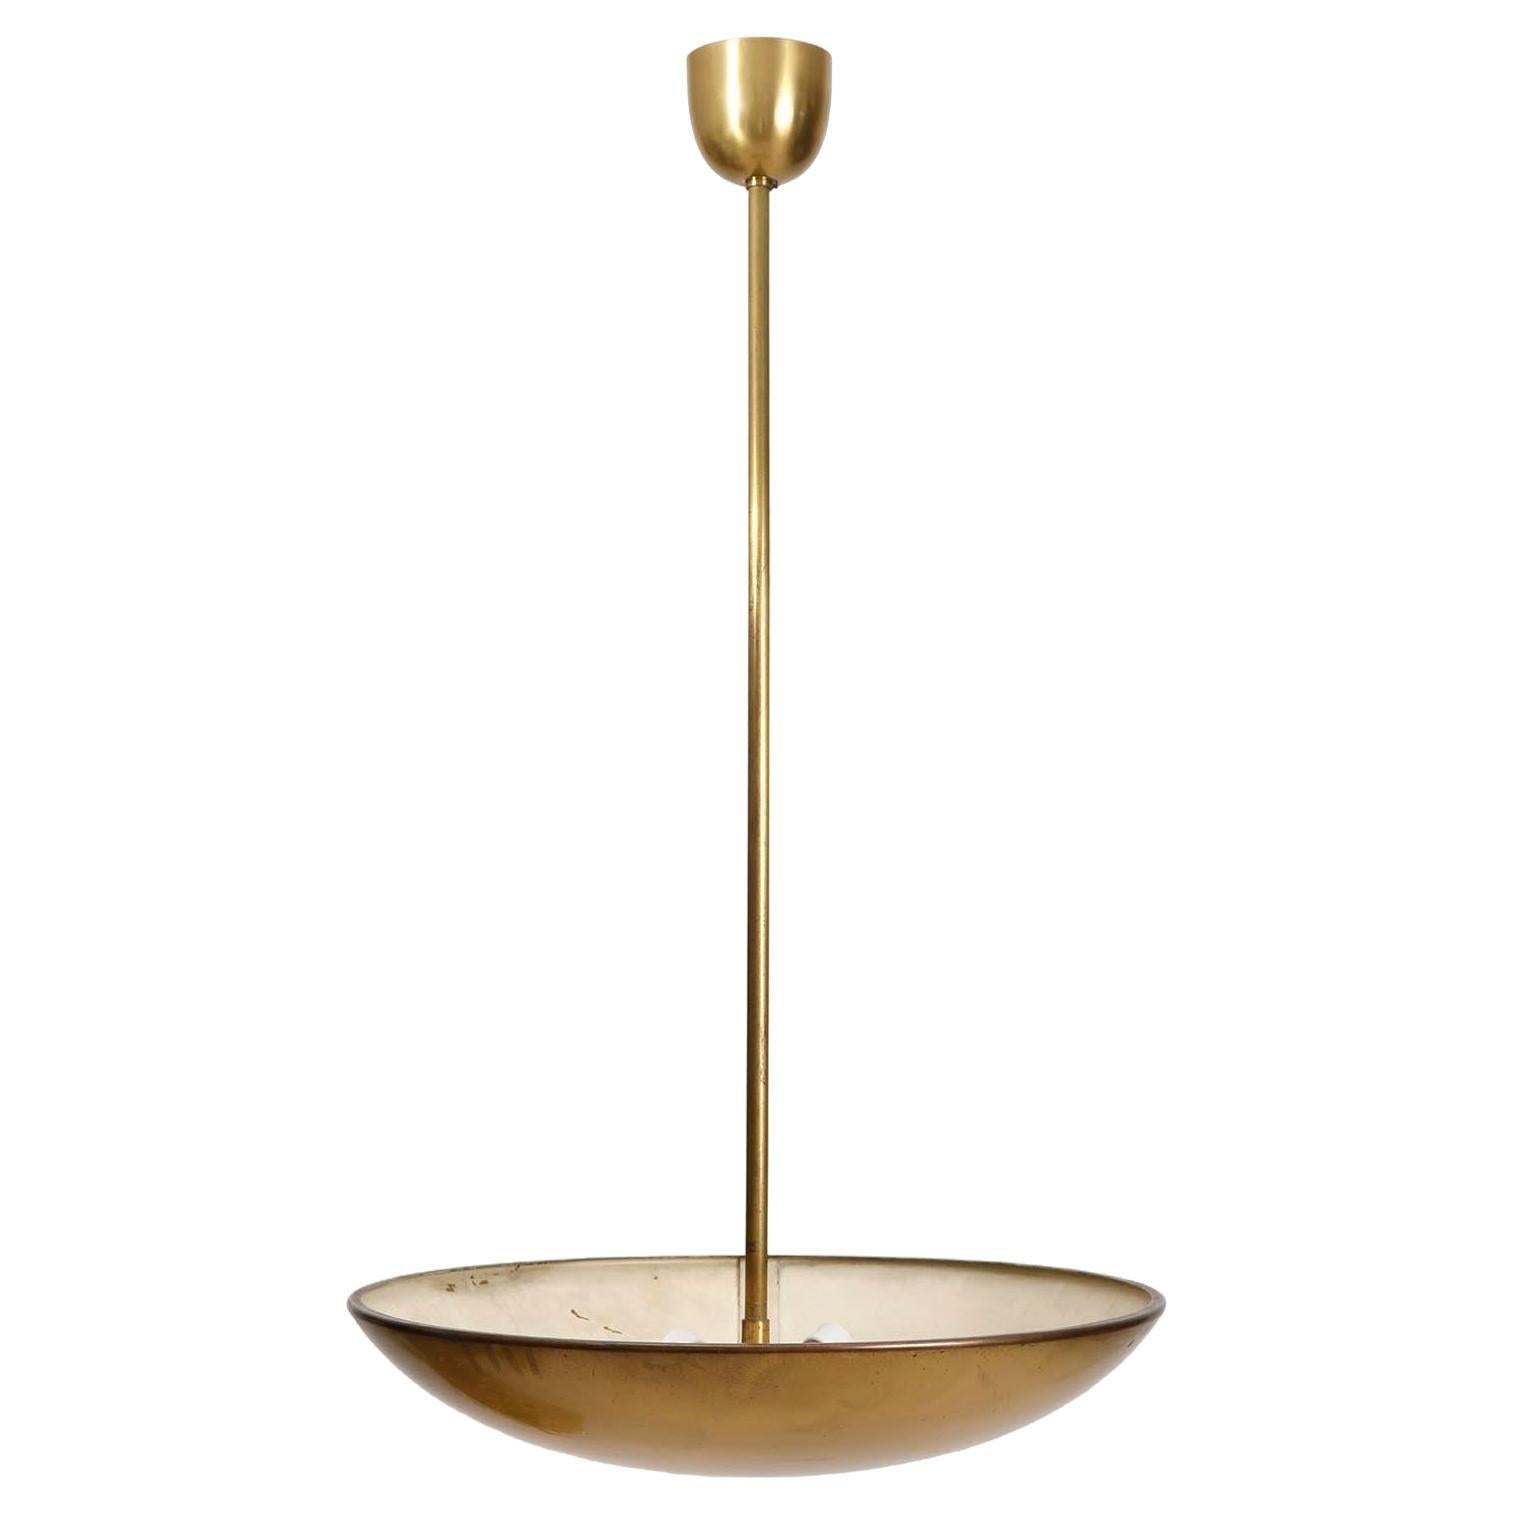 Late 20th Century Patinated Brass Uplight Bowl Chandelier Pendant Light by J.T. Kalmar, 1960 For Sale